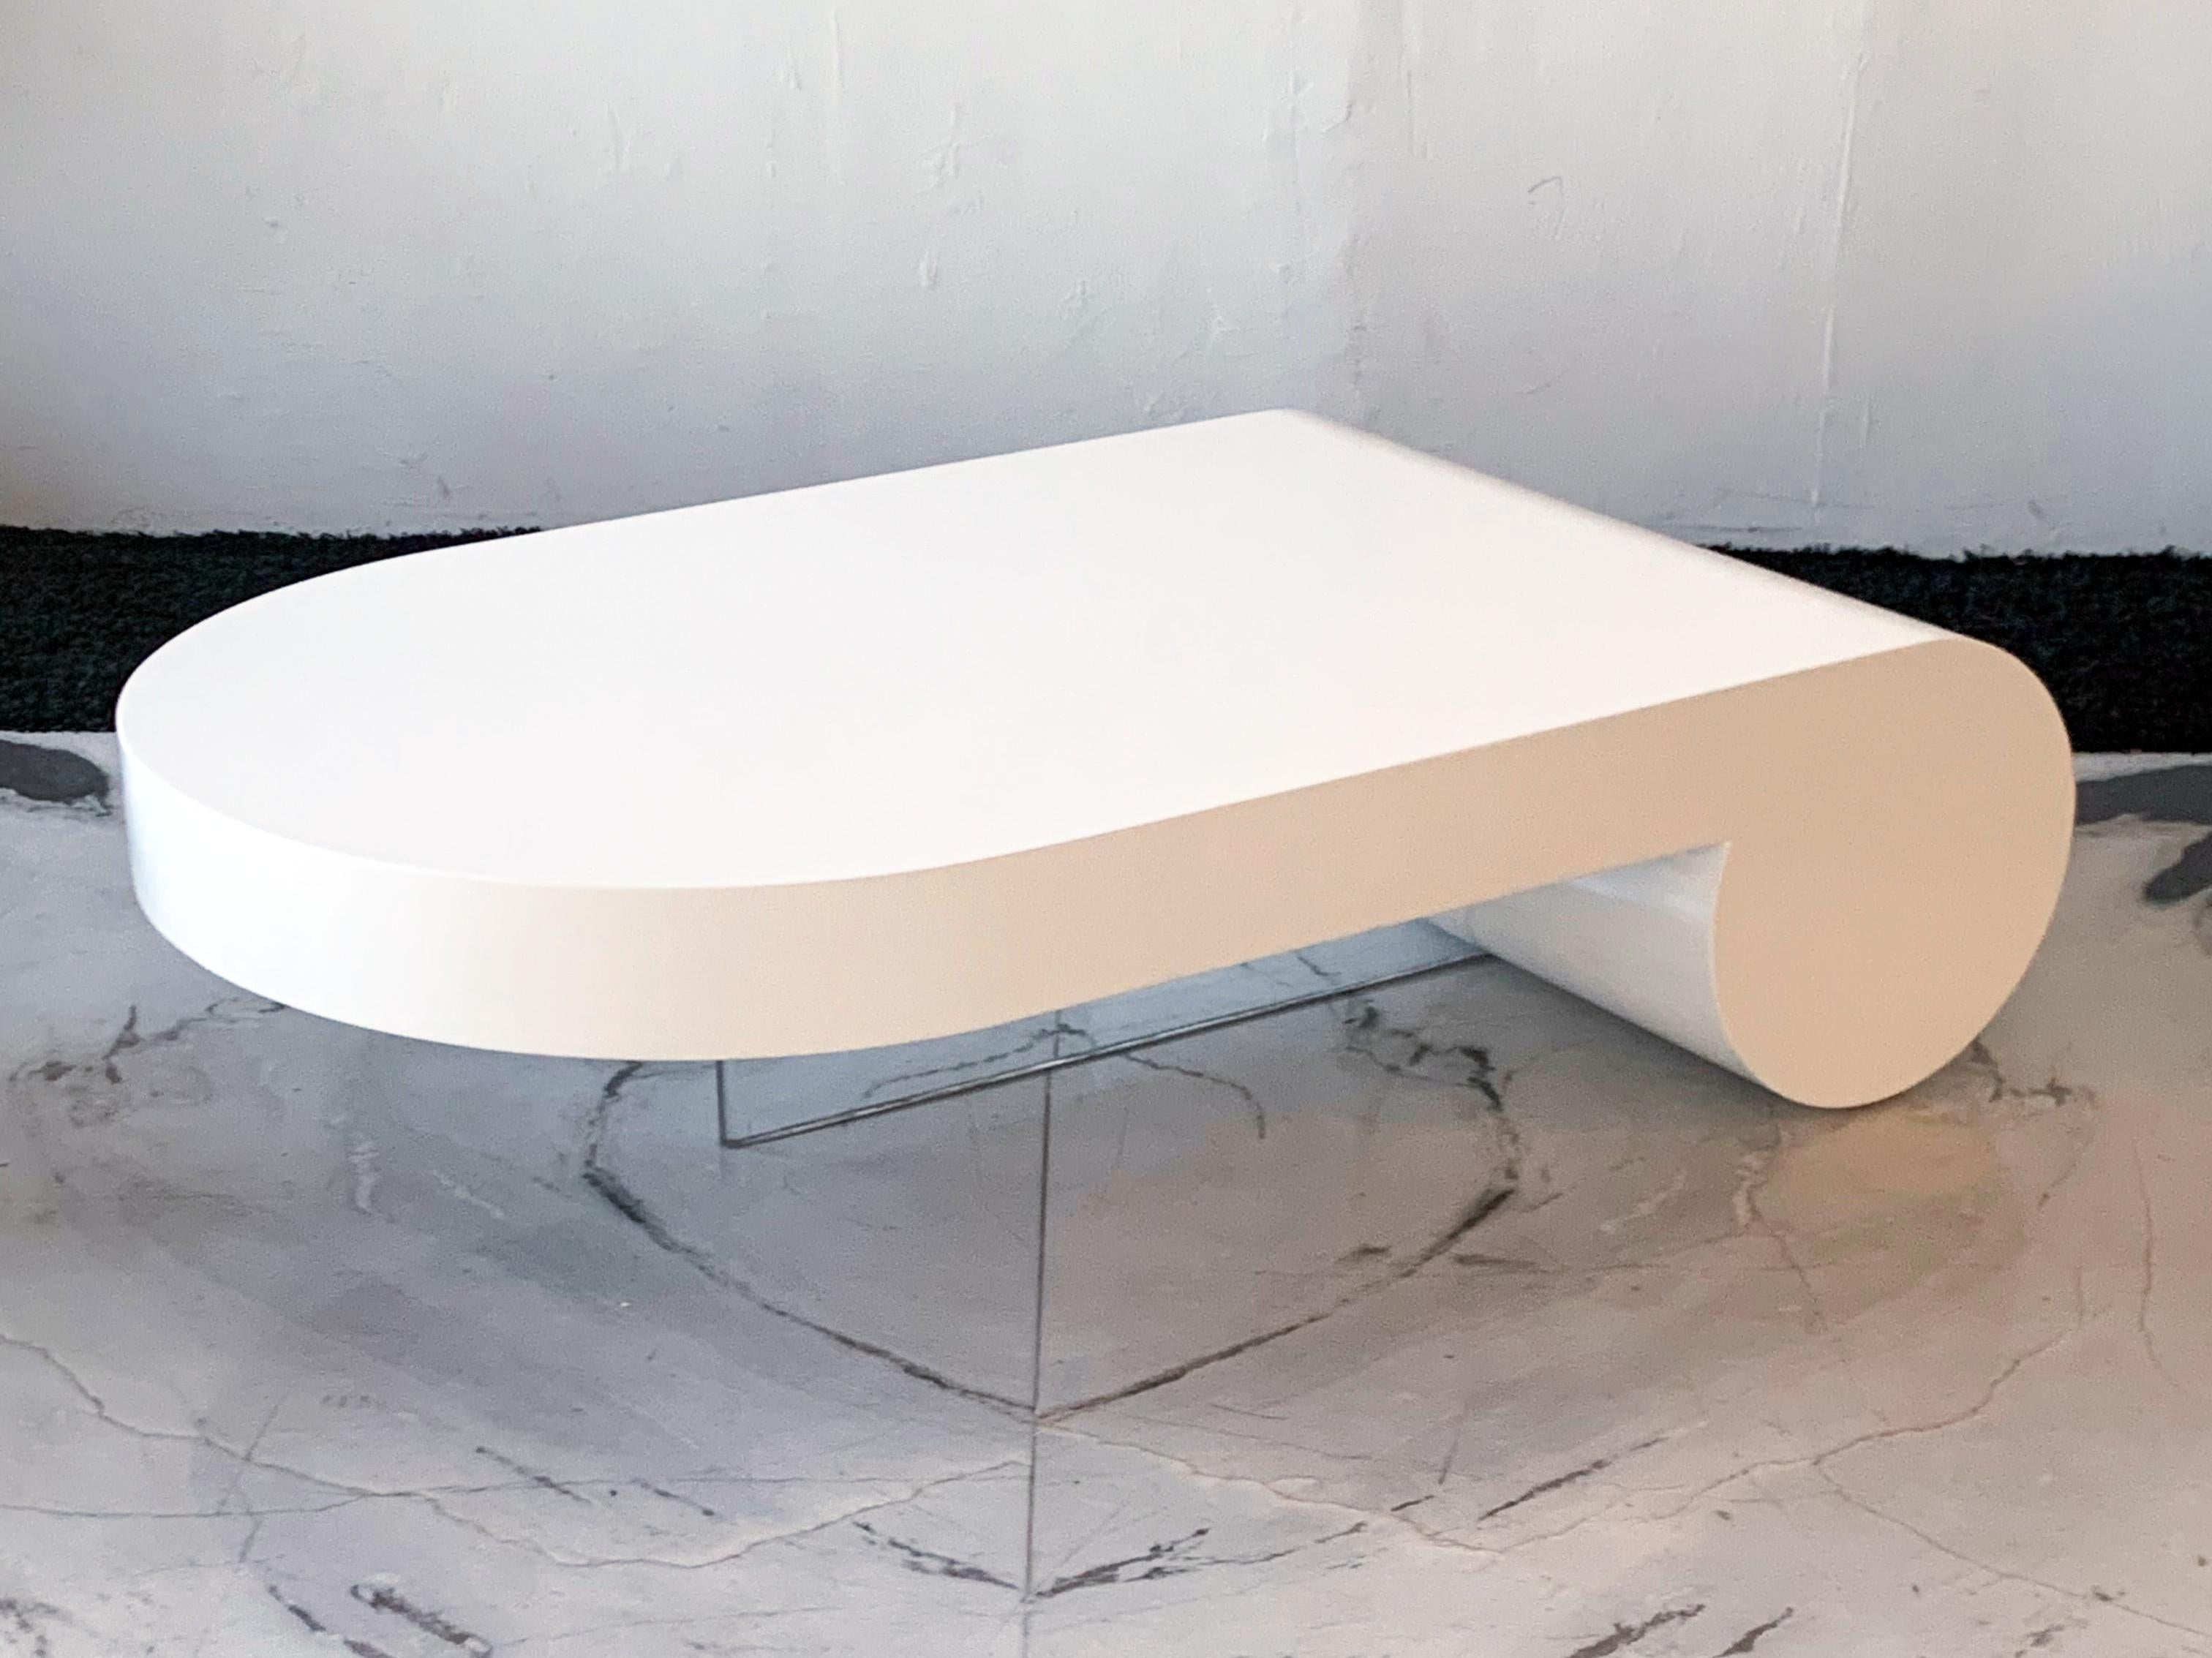 Available at the gallery right now, we have a stunning, very large coffee table designed by Vladimir Kagan for Directional. This coffee, called the Plateau table features a waterfall edge with an acrylic leg almost an identical leg / support to